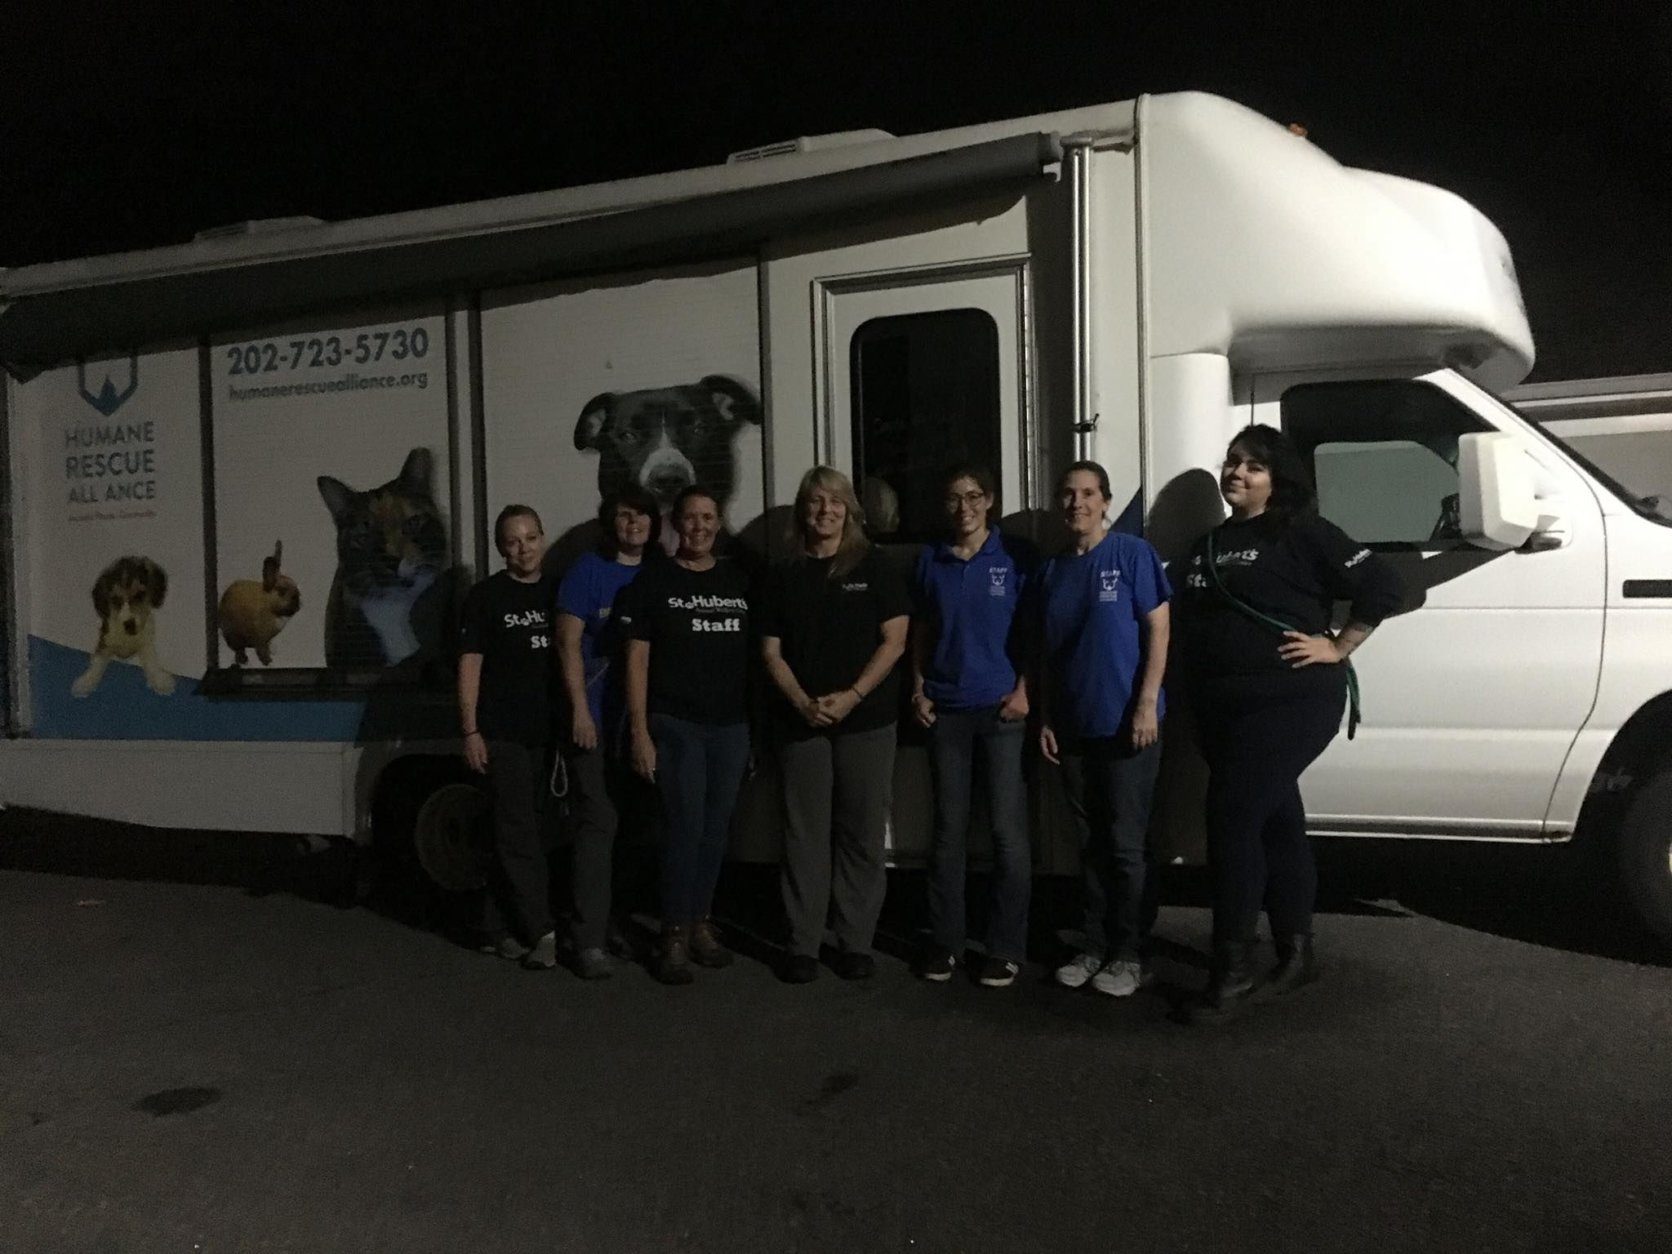 Humane Rescue Alliance personnel pose for a photo in front of a van. Night has fallen.